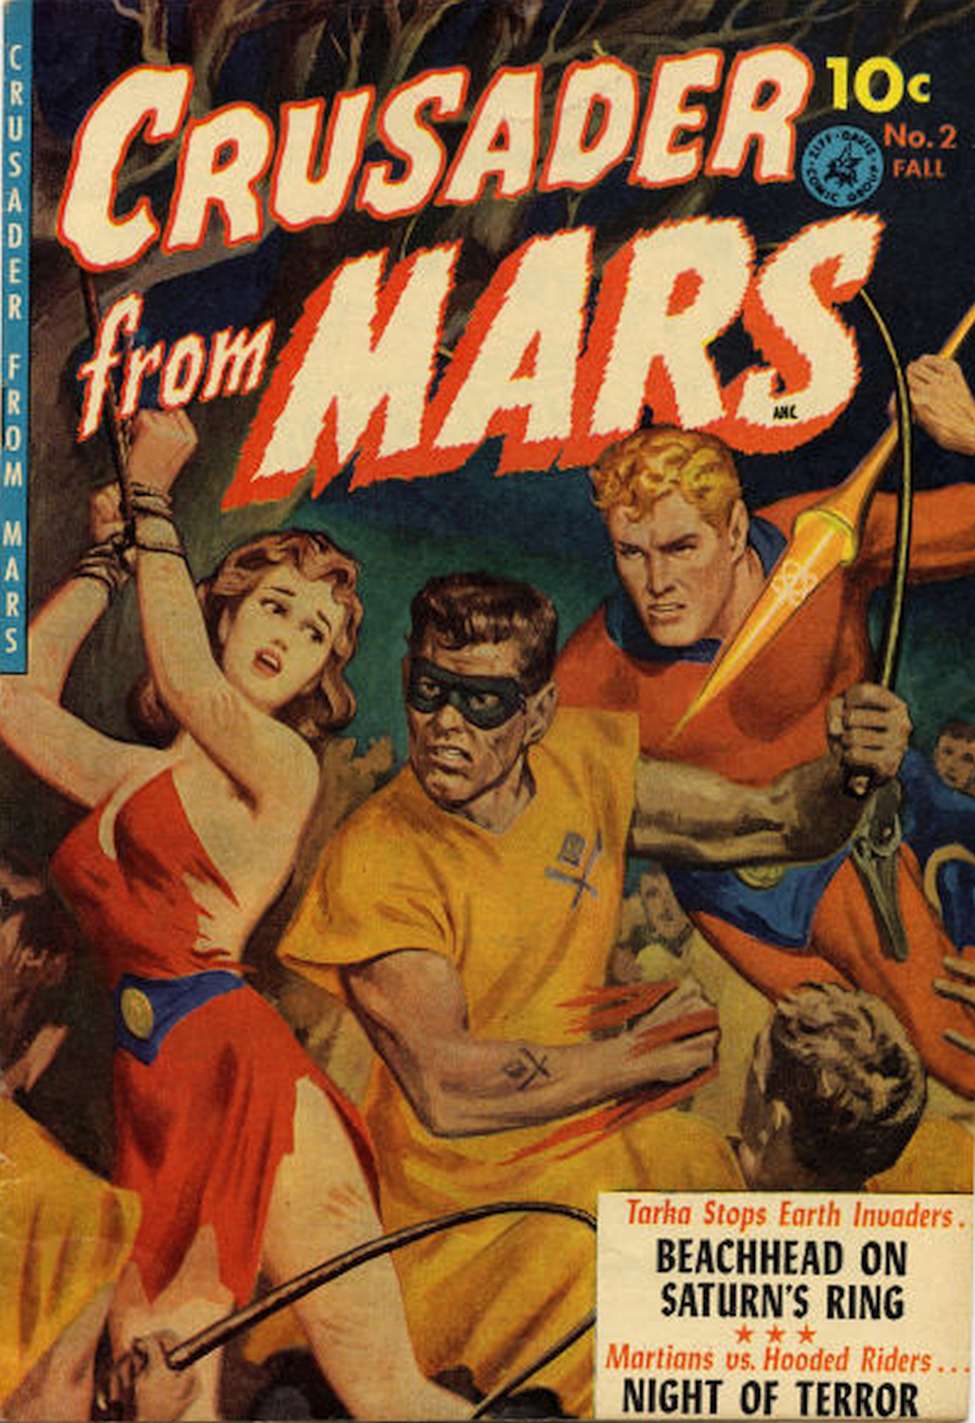 Comic Book Cover For Crusader from Mars 2